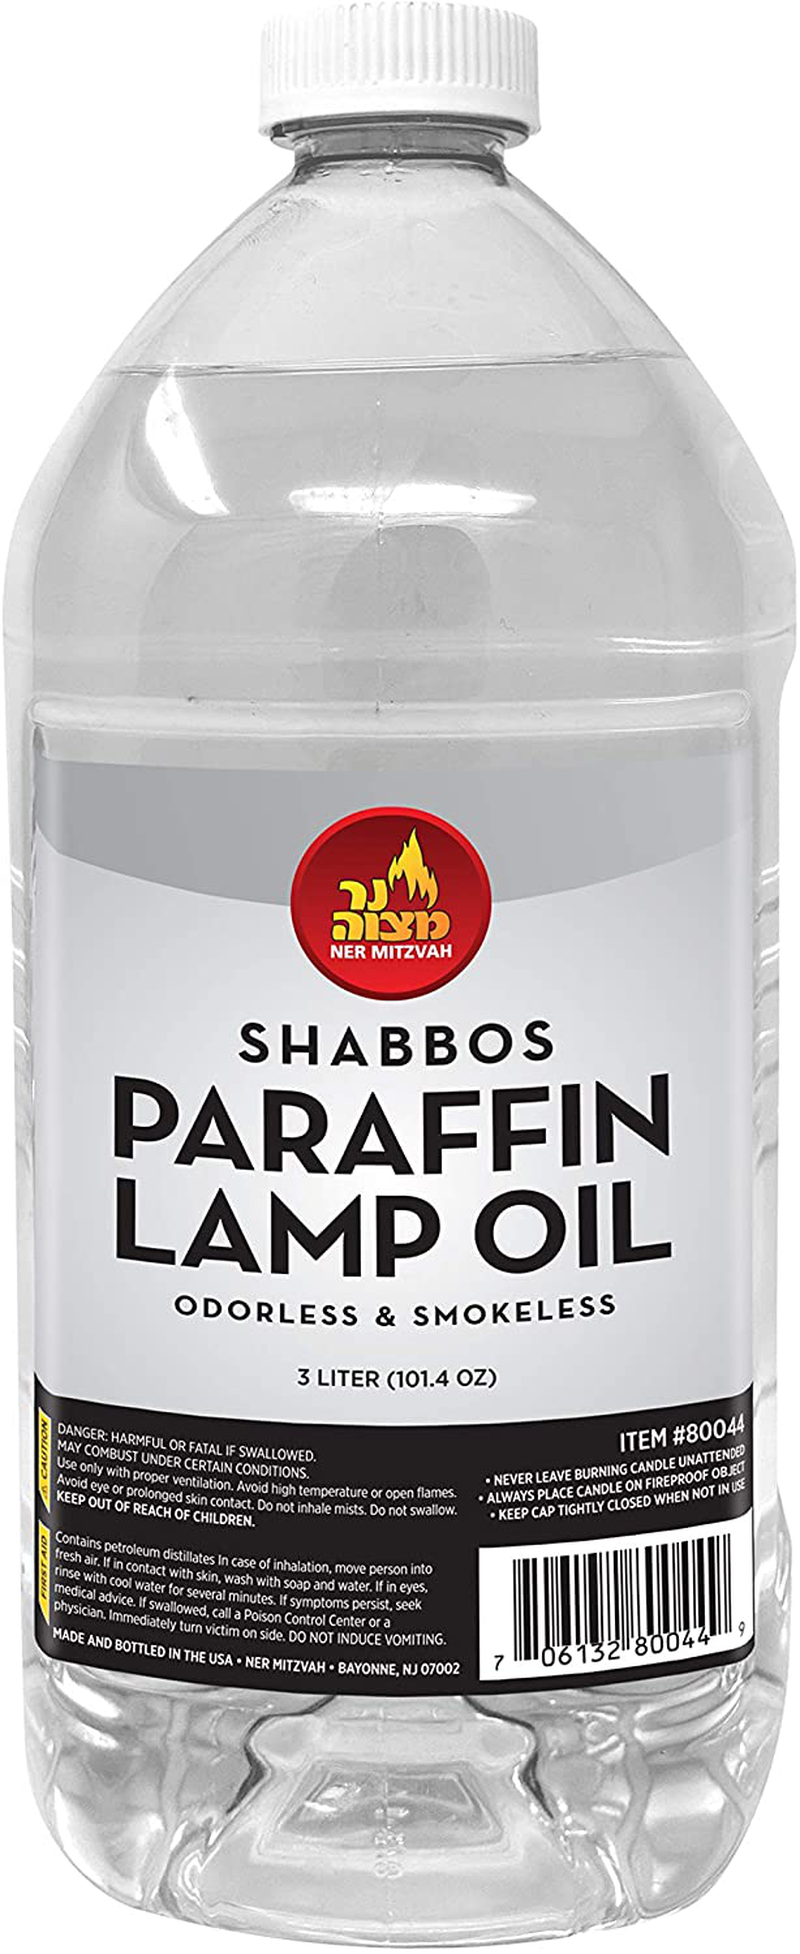 Ner Mitzvah Paraffin Lamp Oil - 3 Liter - Clear Smokeless, Odorless, Clean Burning Fuel for Indoor and Outdoor Use - (101.4 oz) Home & Garden > Lighting Accessories > Oil Lamp Fuel Ner Mitzvah   